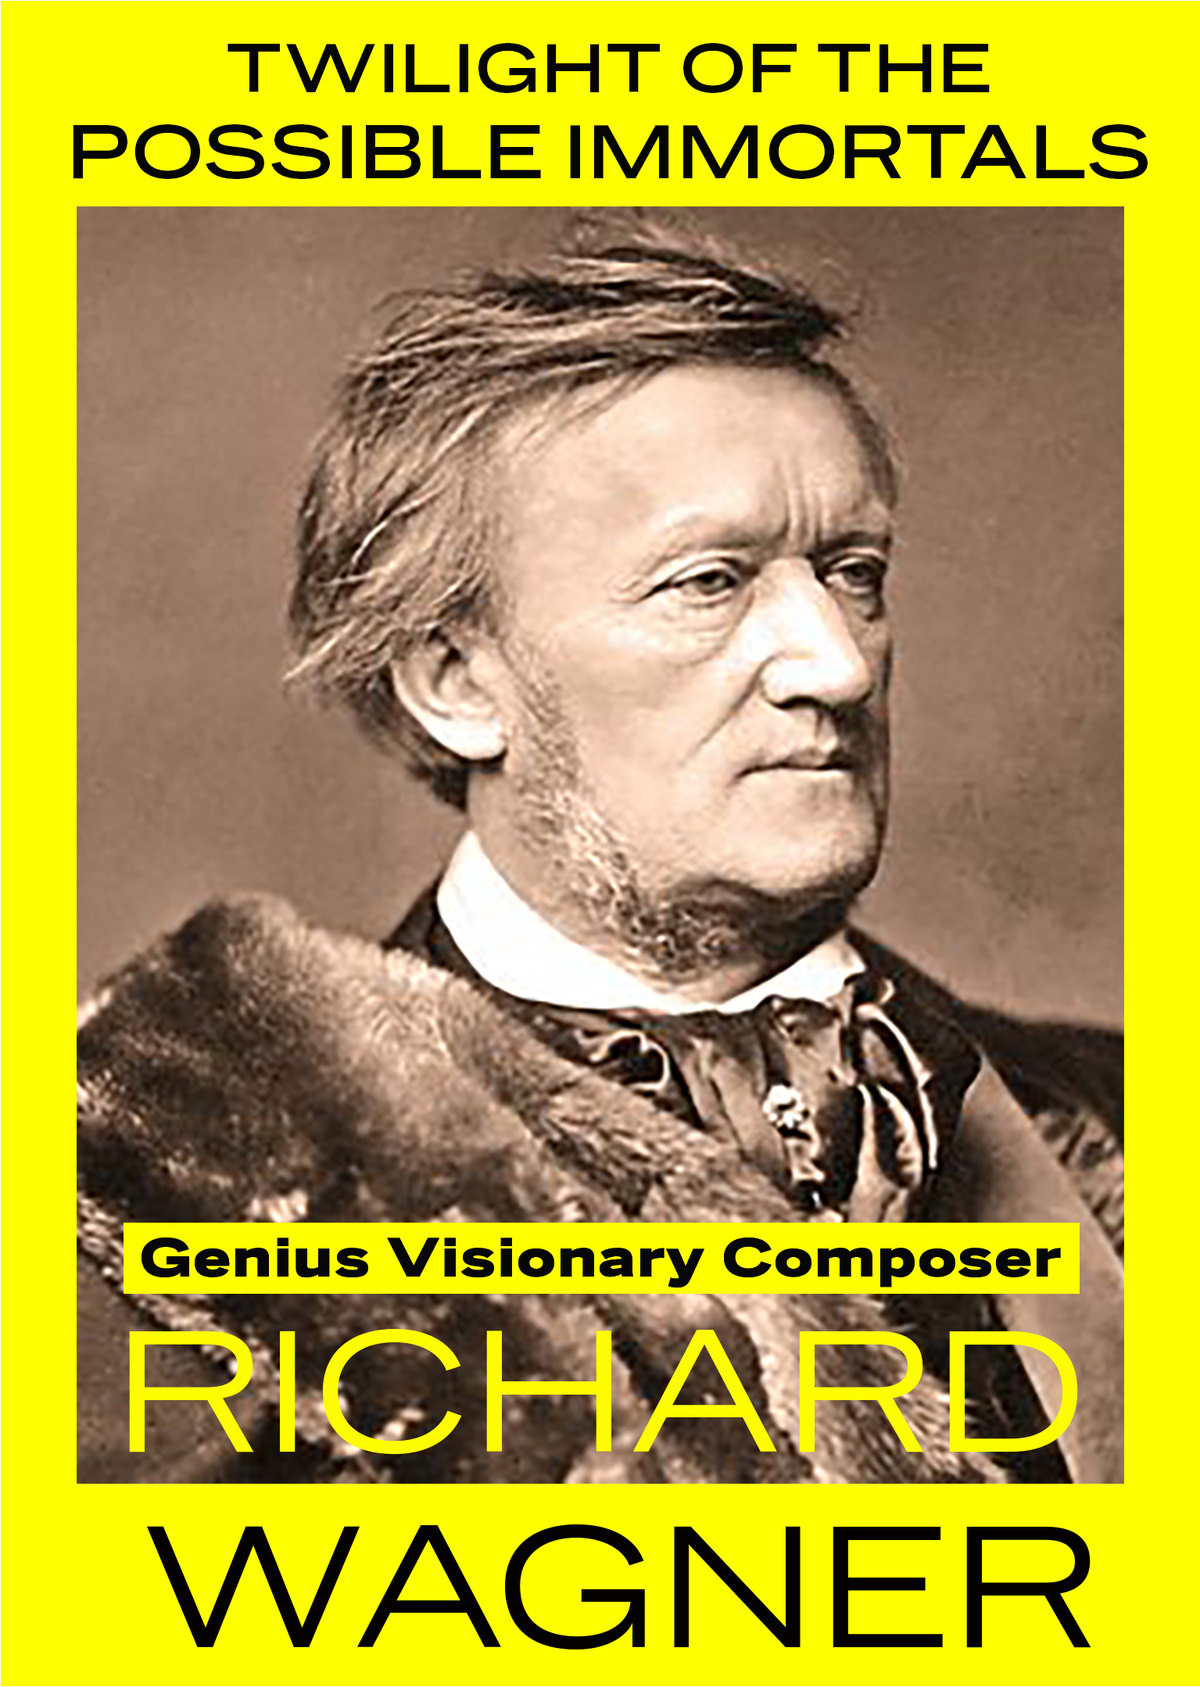 K5060 - Twilight of the Possible Immortals - Genius Visionary Composer Richard Wagner